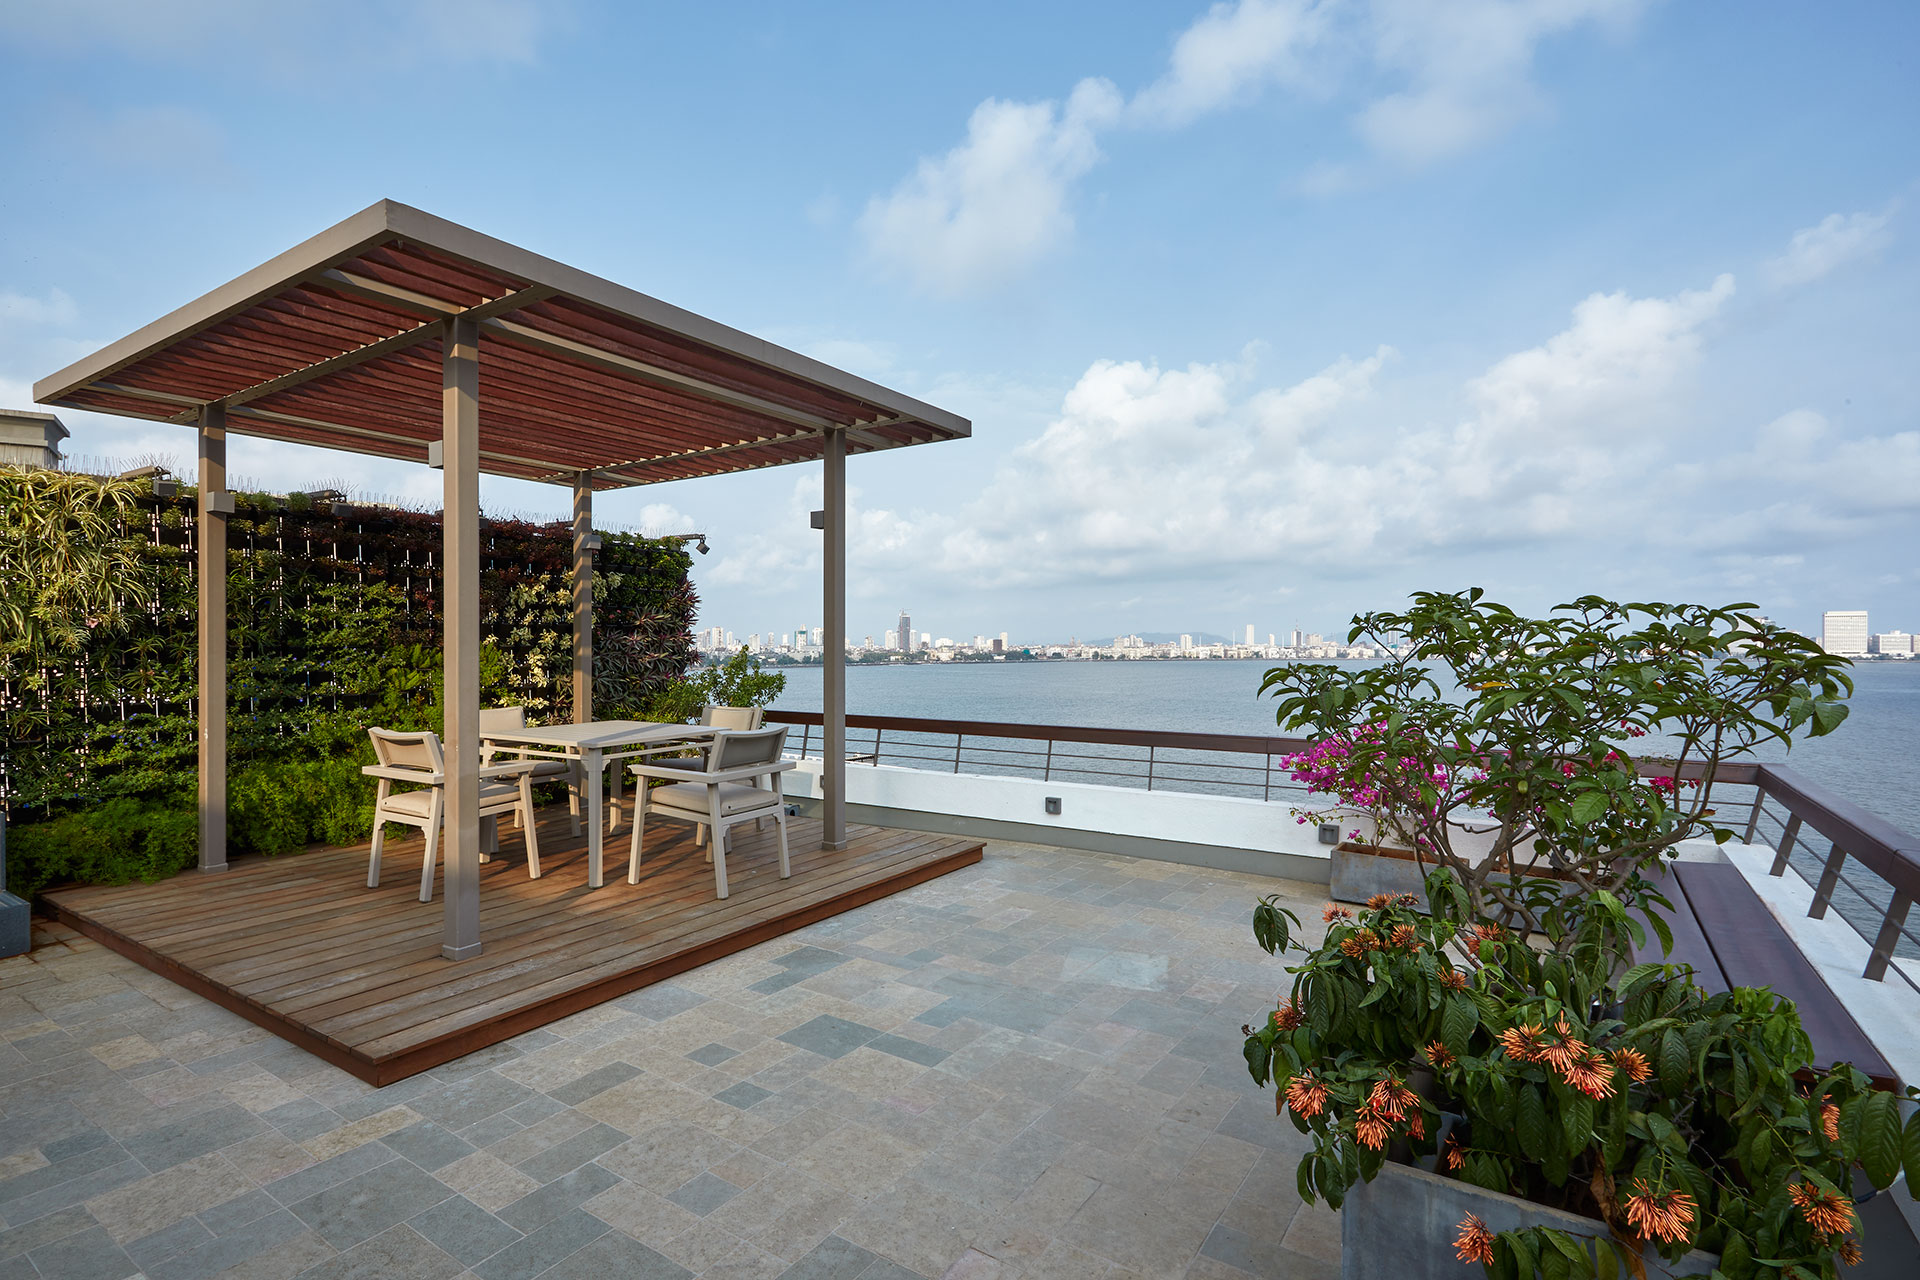 Most of the family’s entertaining takes place outdoors, on the terrace. A pergola seating, a dining area, a bar counter, a green wall that ended in a stepwell water feature were all added to the terrace, while keeping the views clear from the living and dining area.